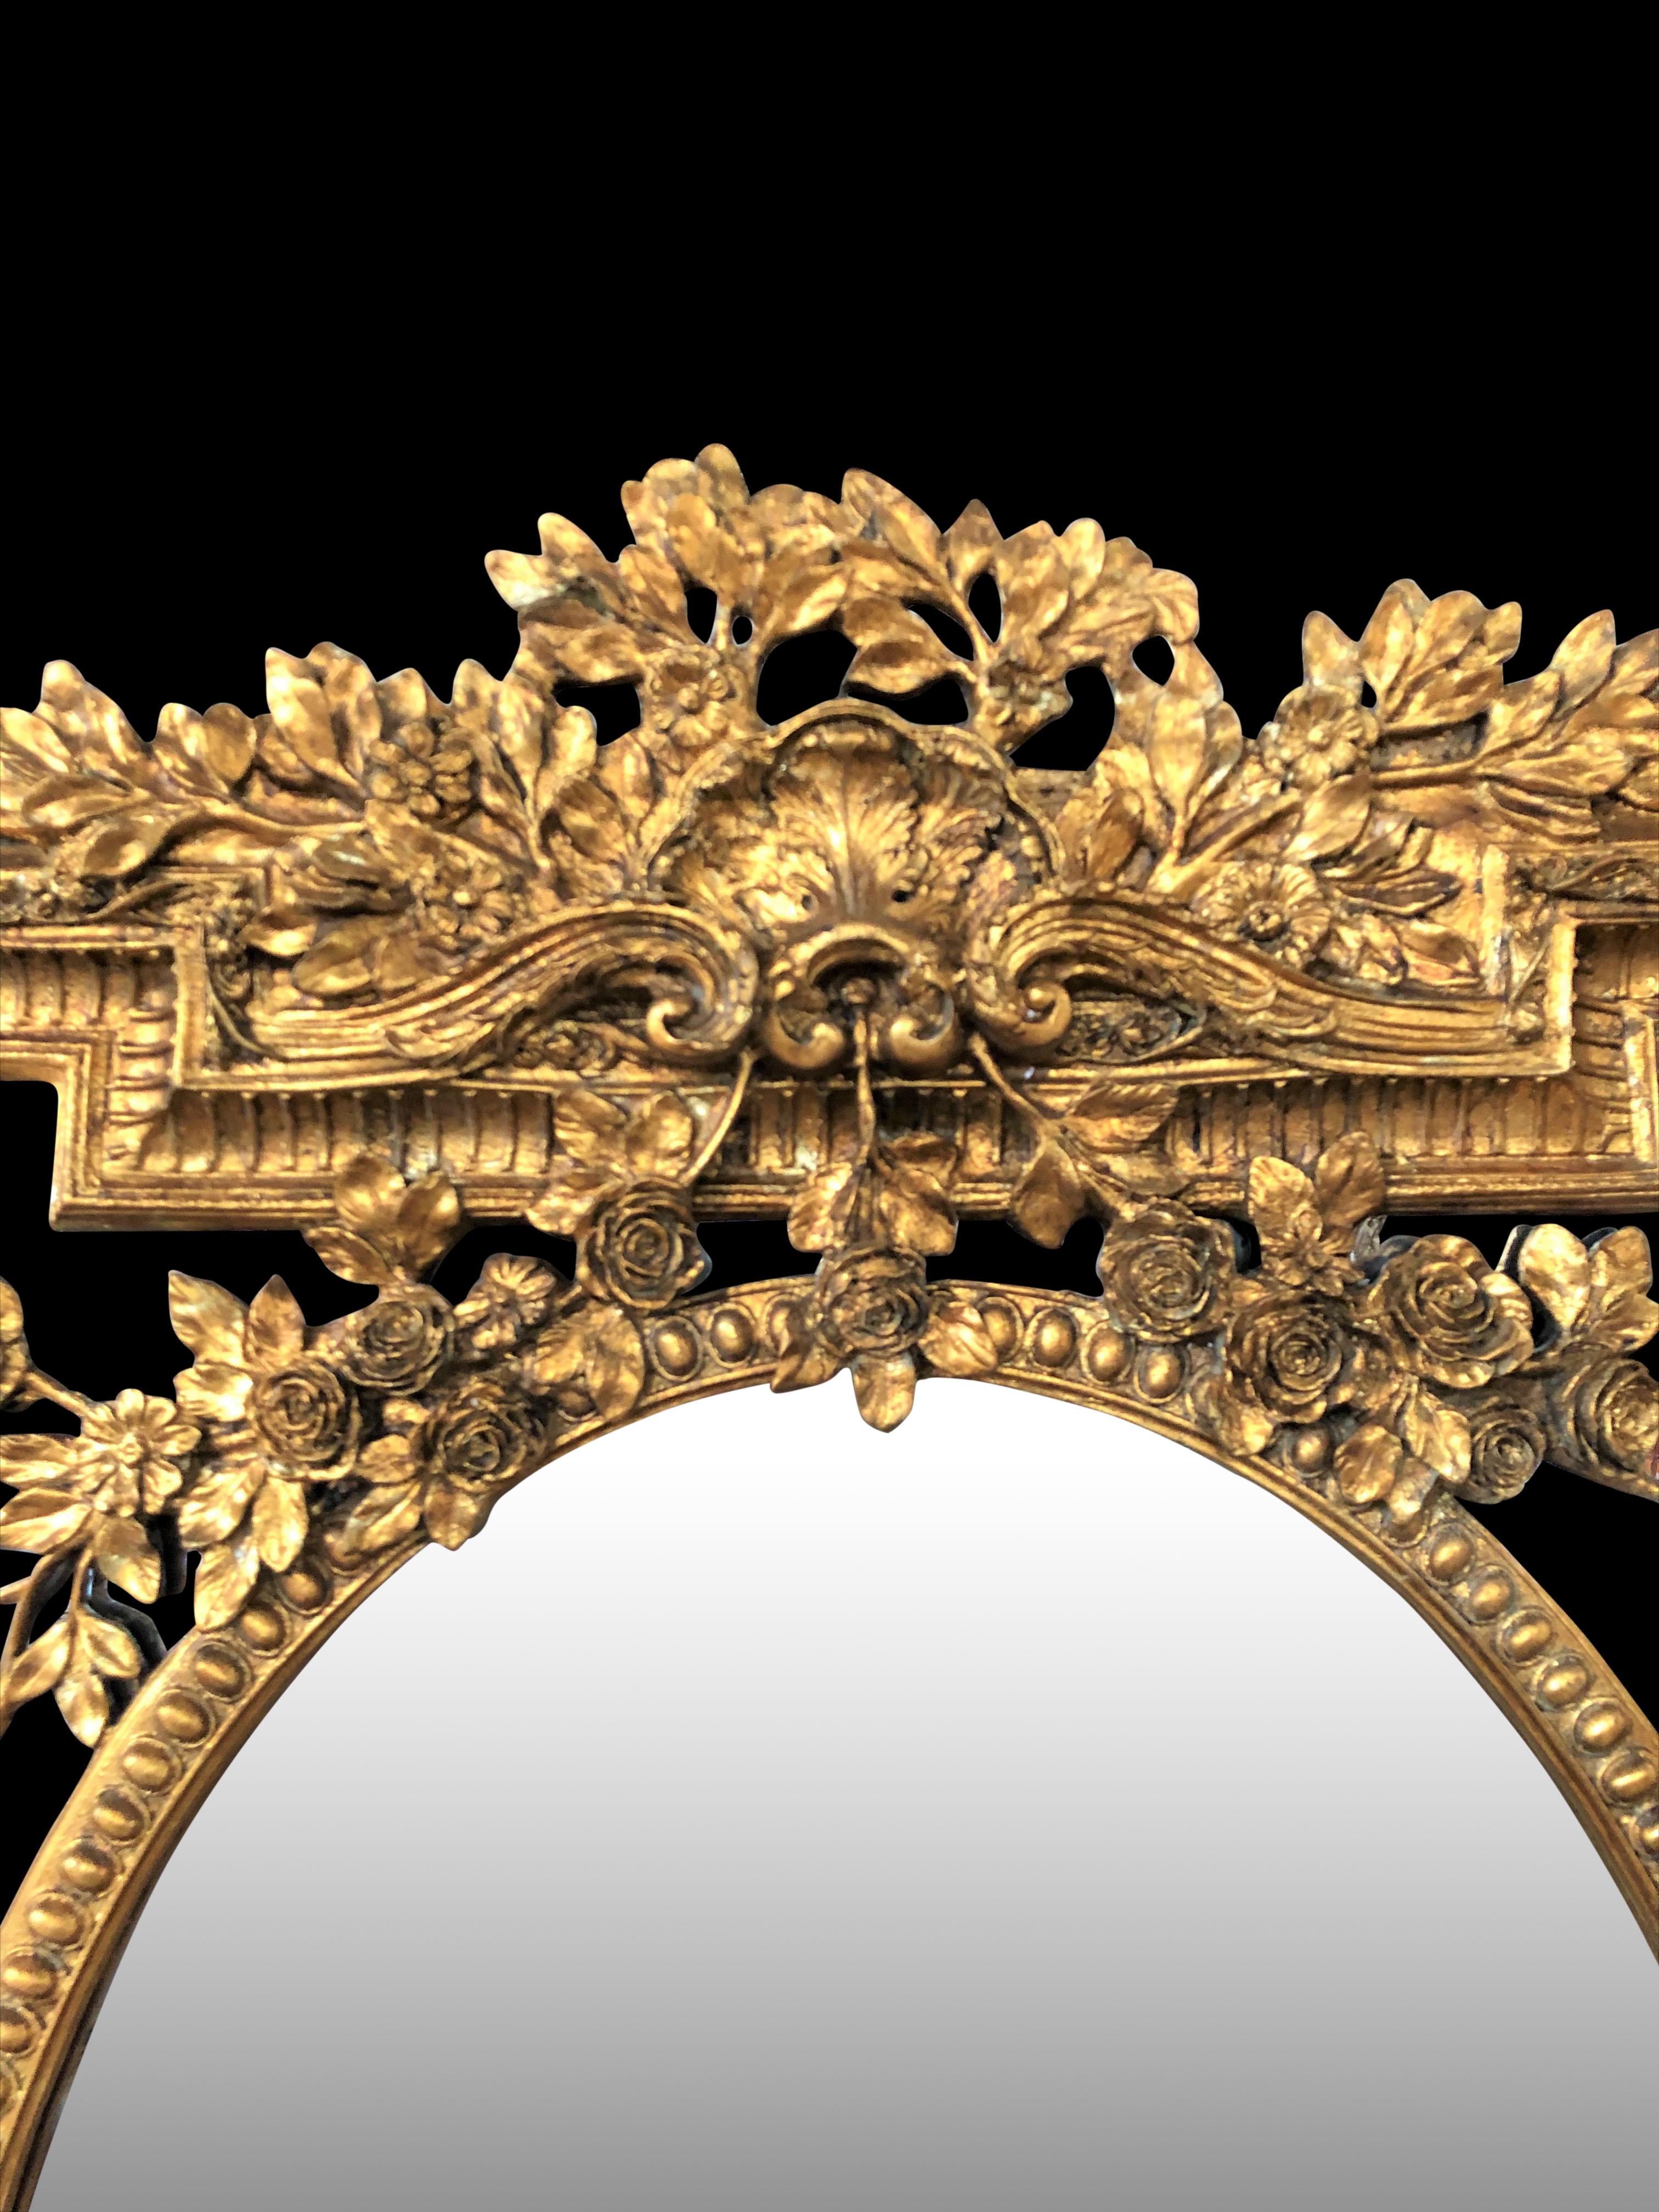 An elegant Victorian style gilt pier mirror, 20th century. Intricate gilt frame with floral motifs and vines. Glass is clear and blemish free ready to add light to any room. Comes in excellent condition.